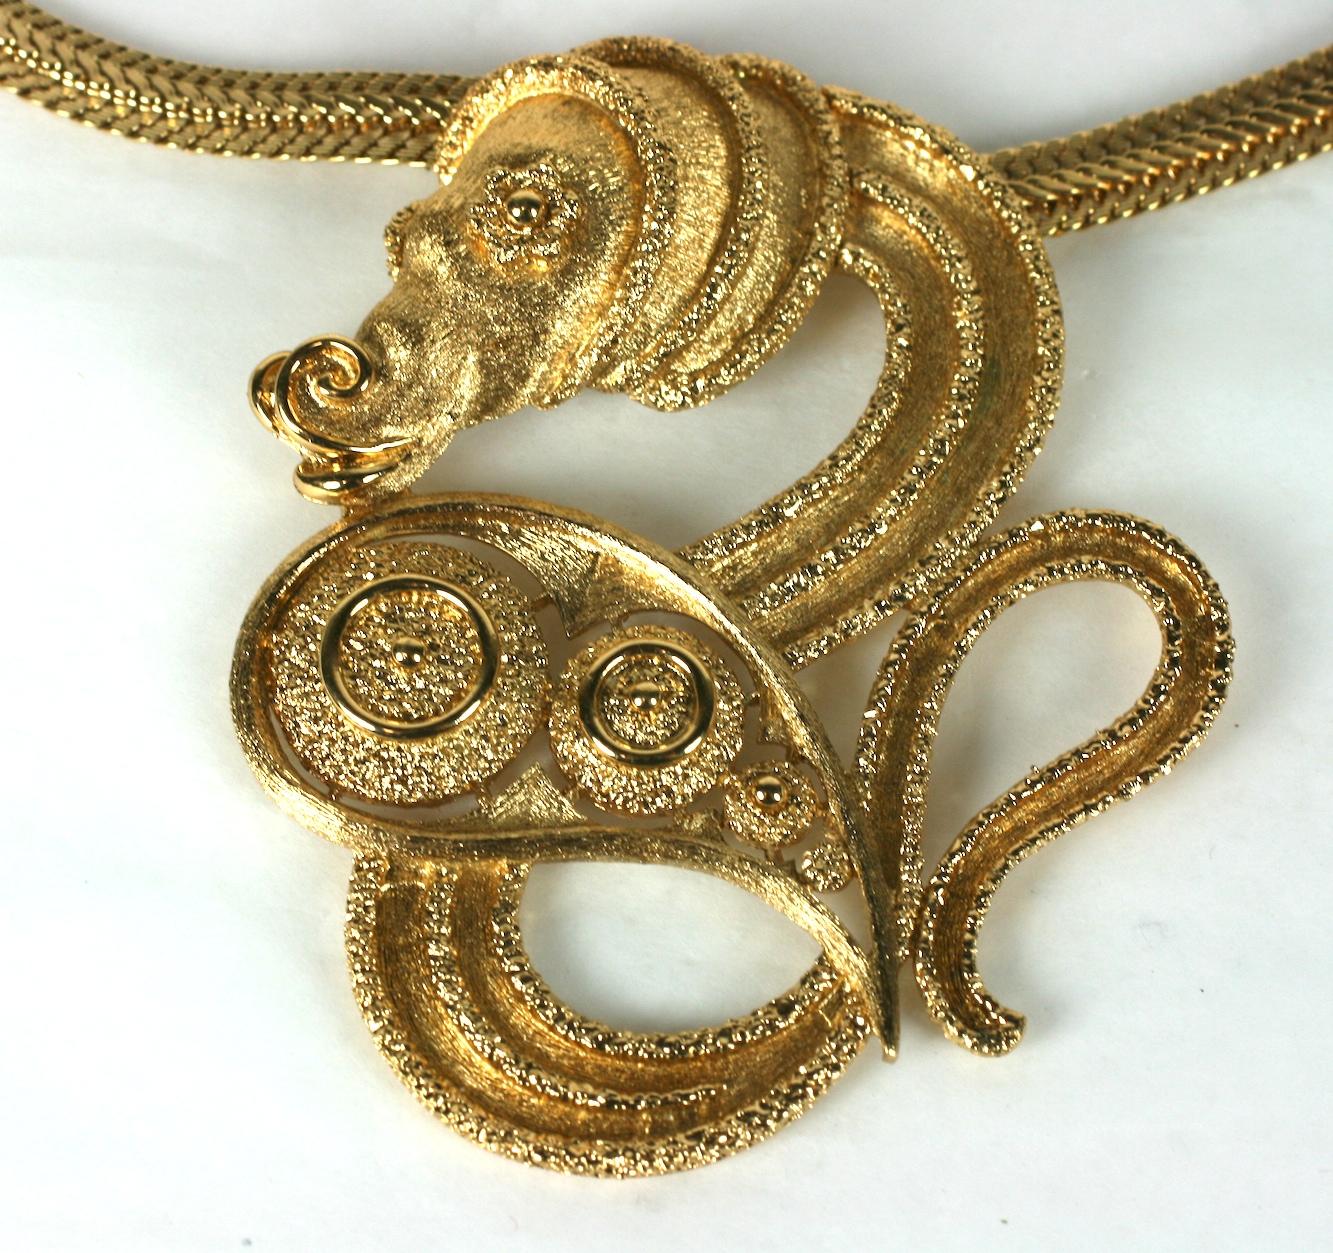 Artisan Monet Mythical Gold Seahorse Pendant Necklace For Sale